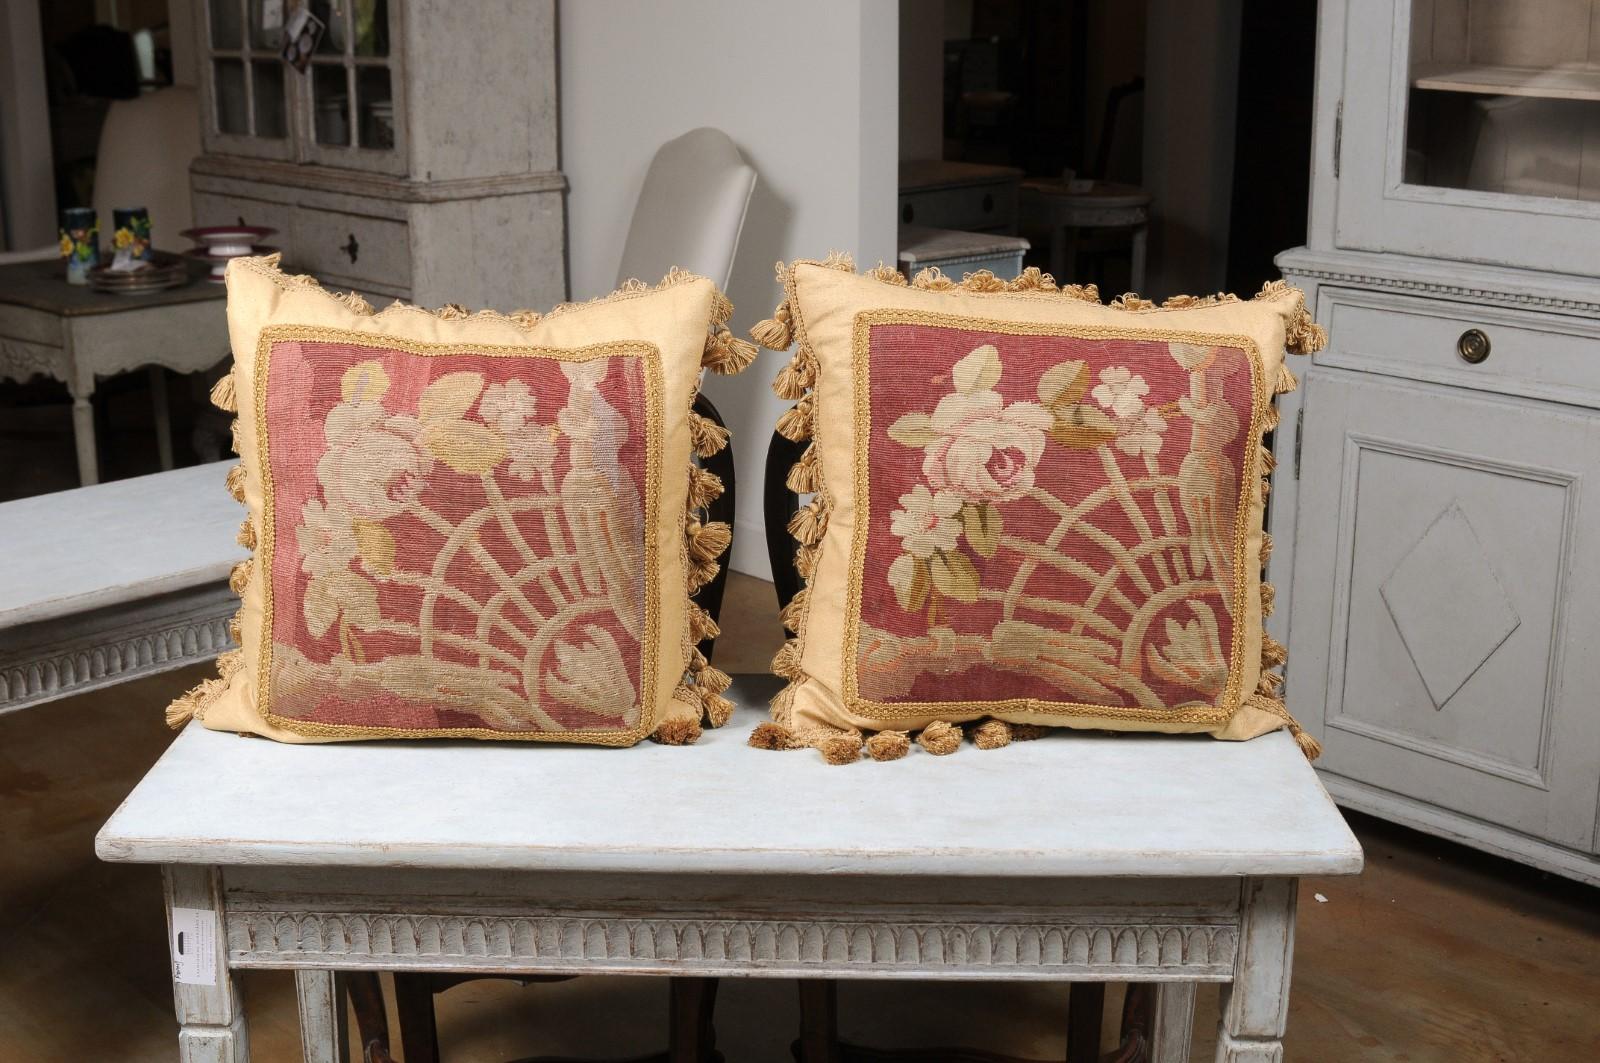 A pair of French Aubusson tapestry pillows from the 19th century, with floral motifs, gallon trim and petite tassels. Created during the 19th century in the Aubusson tapestry manufacture located in central France, each of this pair of pillows